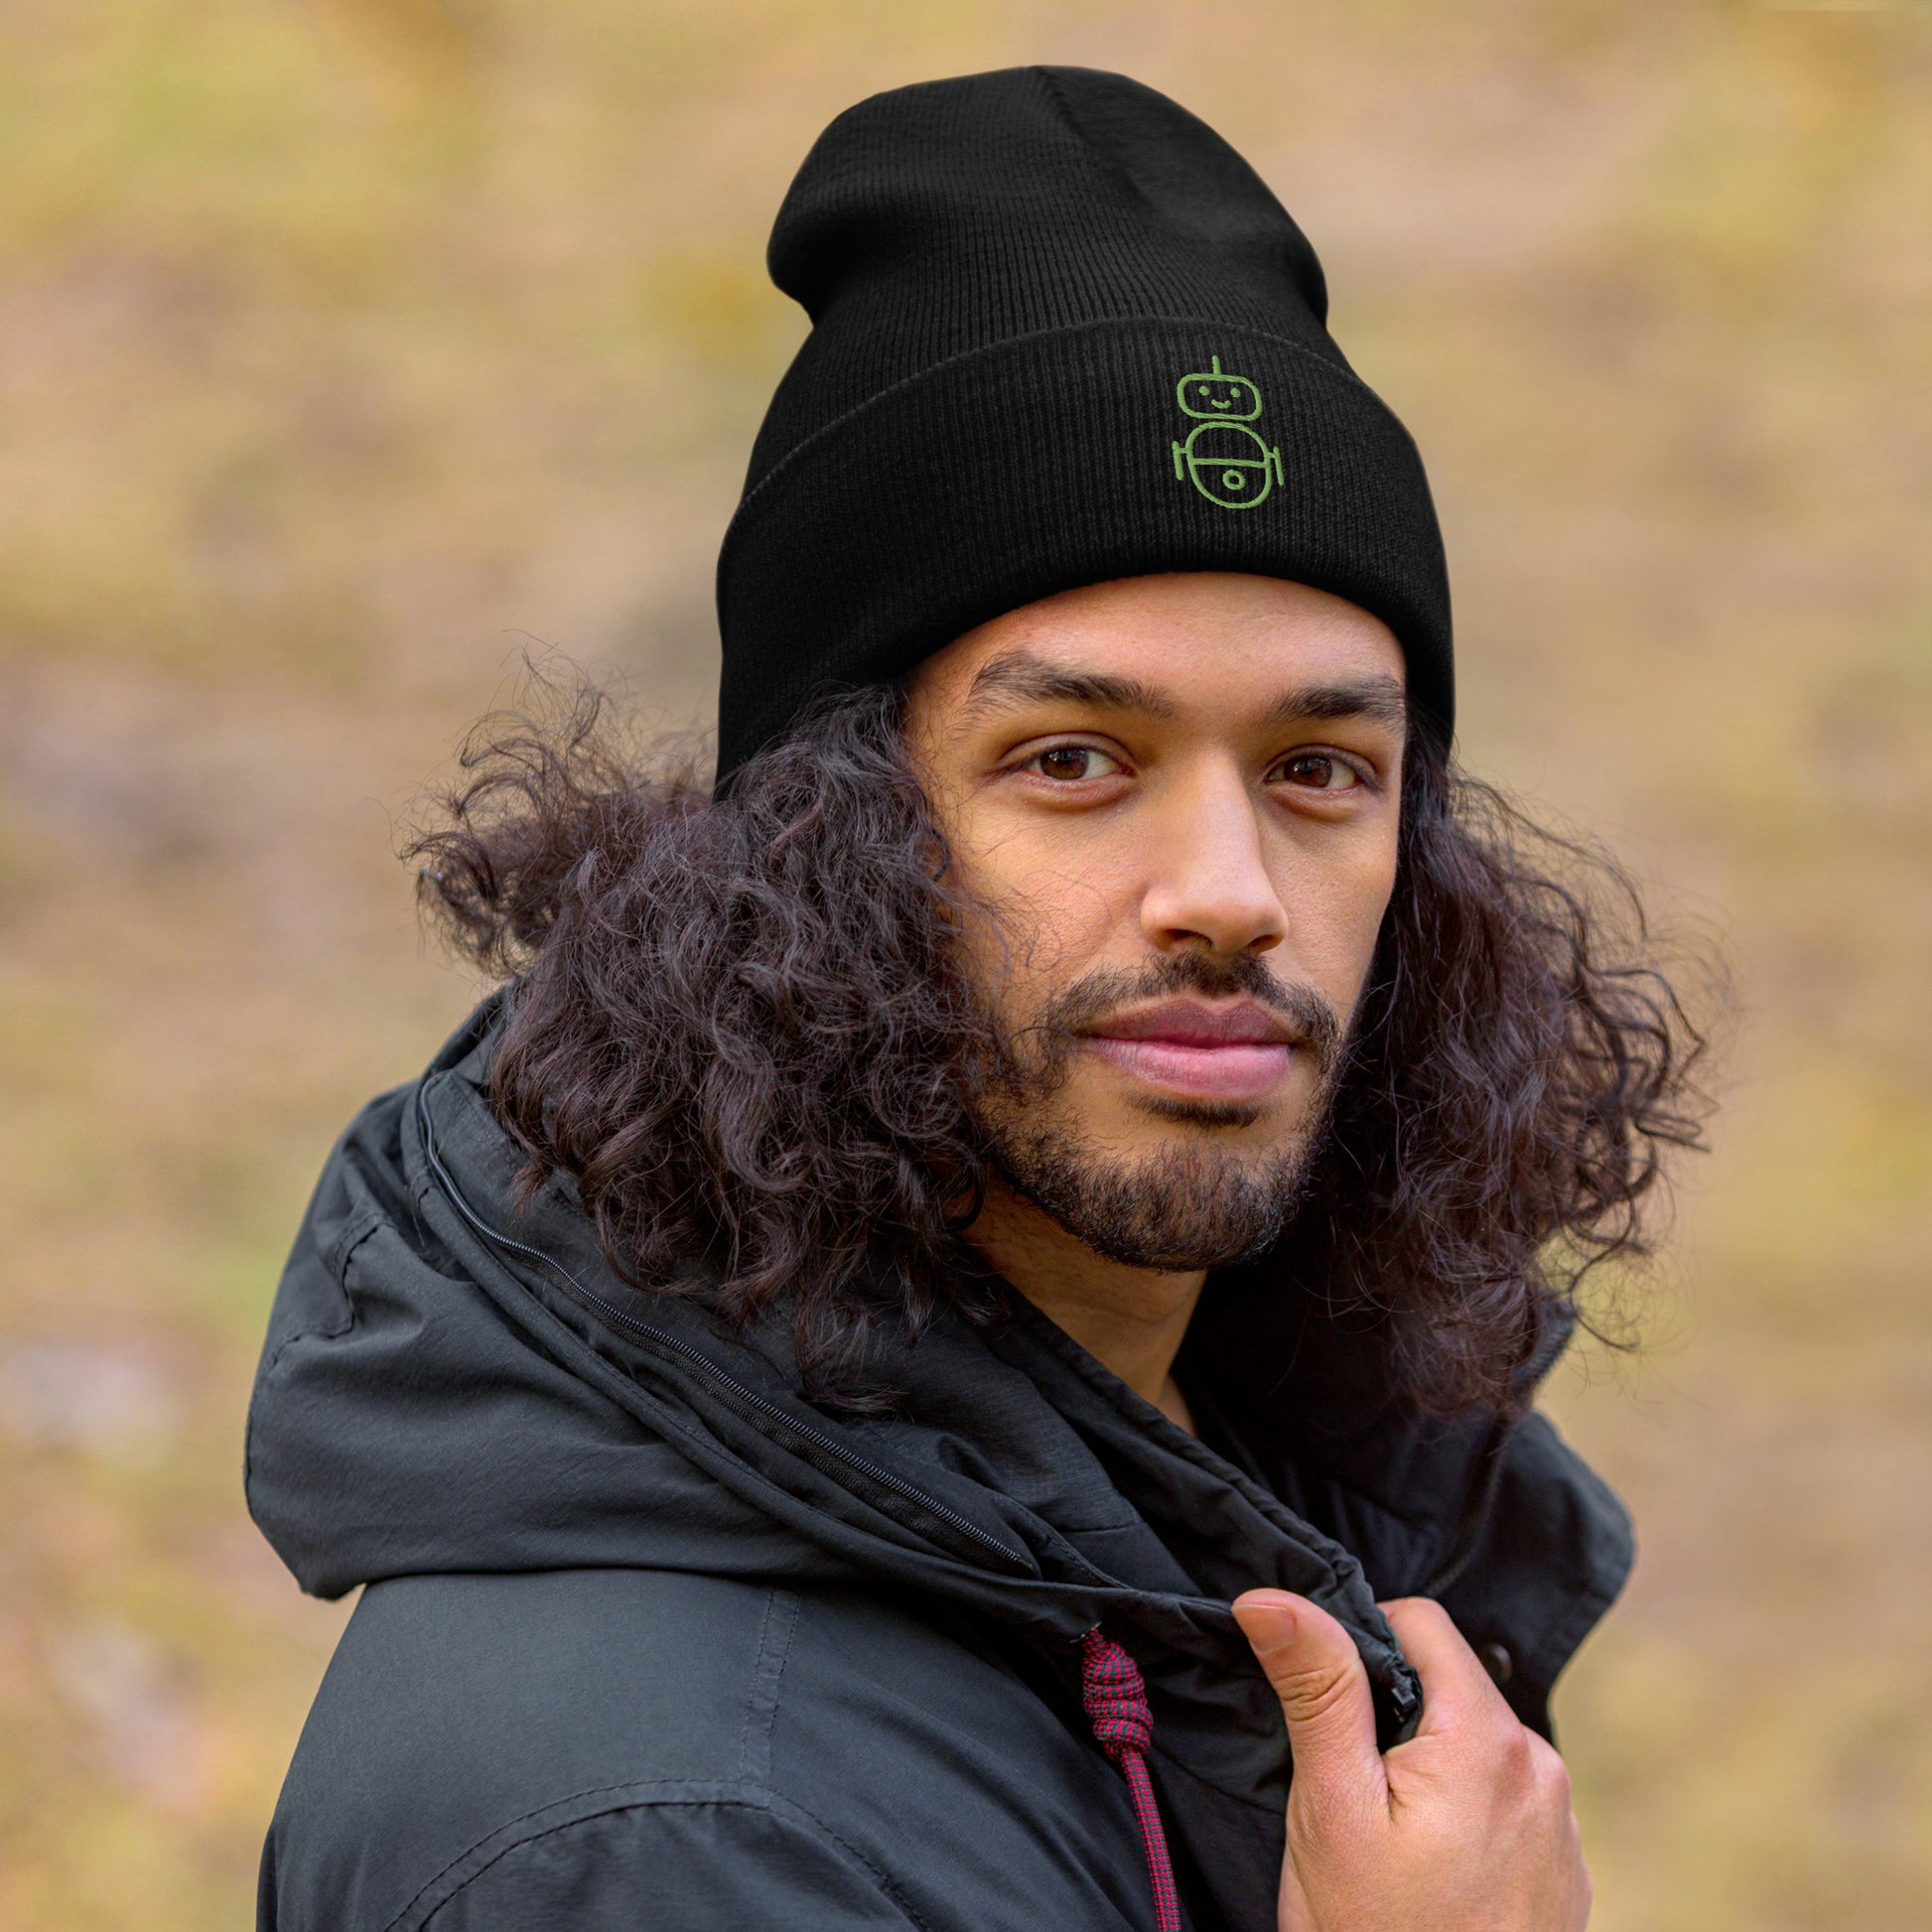 Men with black beanie and Android logo in green